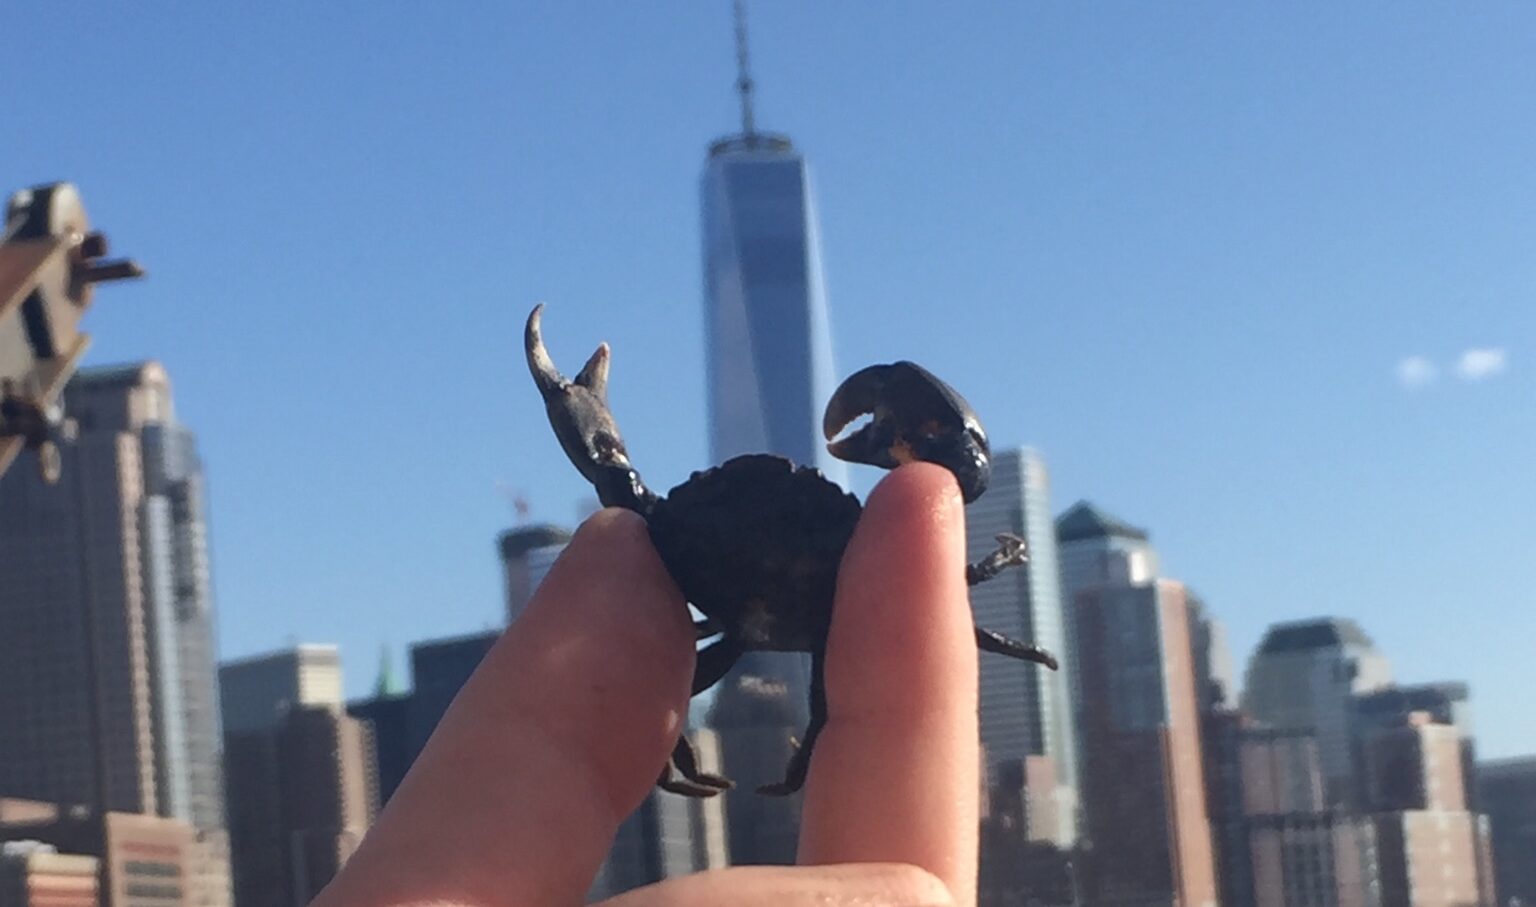 crab held by hand in front of Lower Manhattan skyline